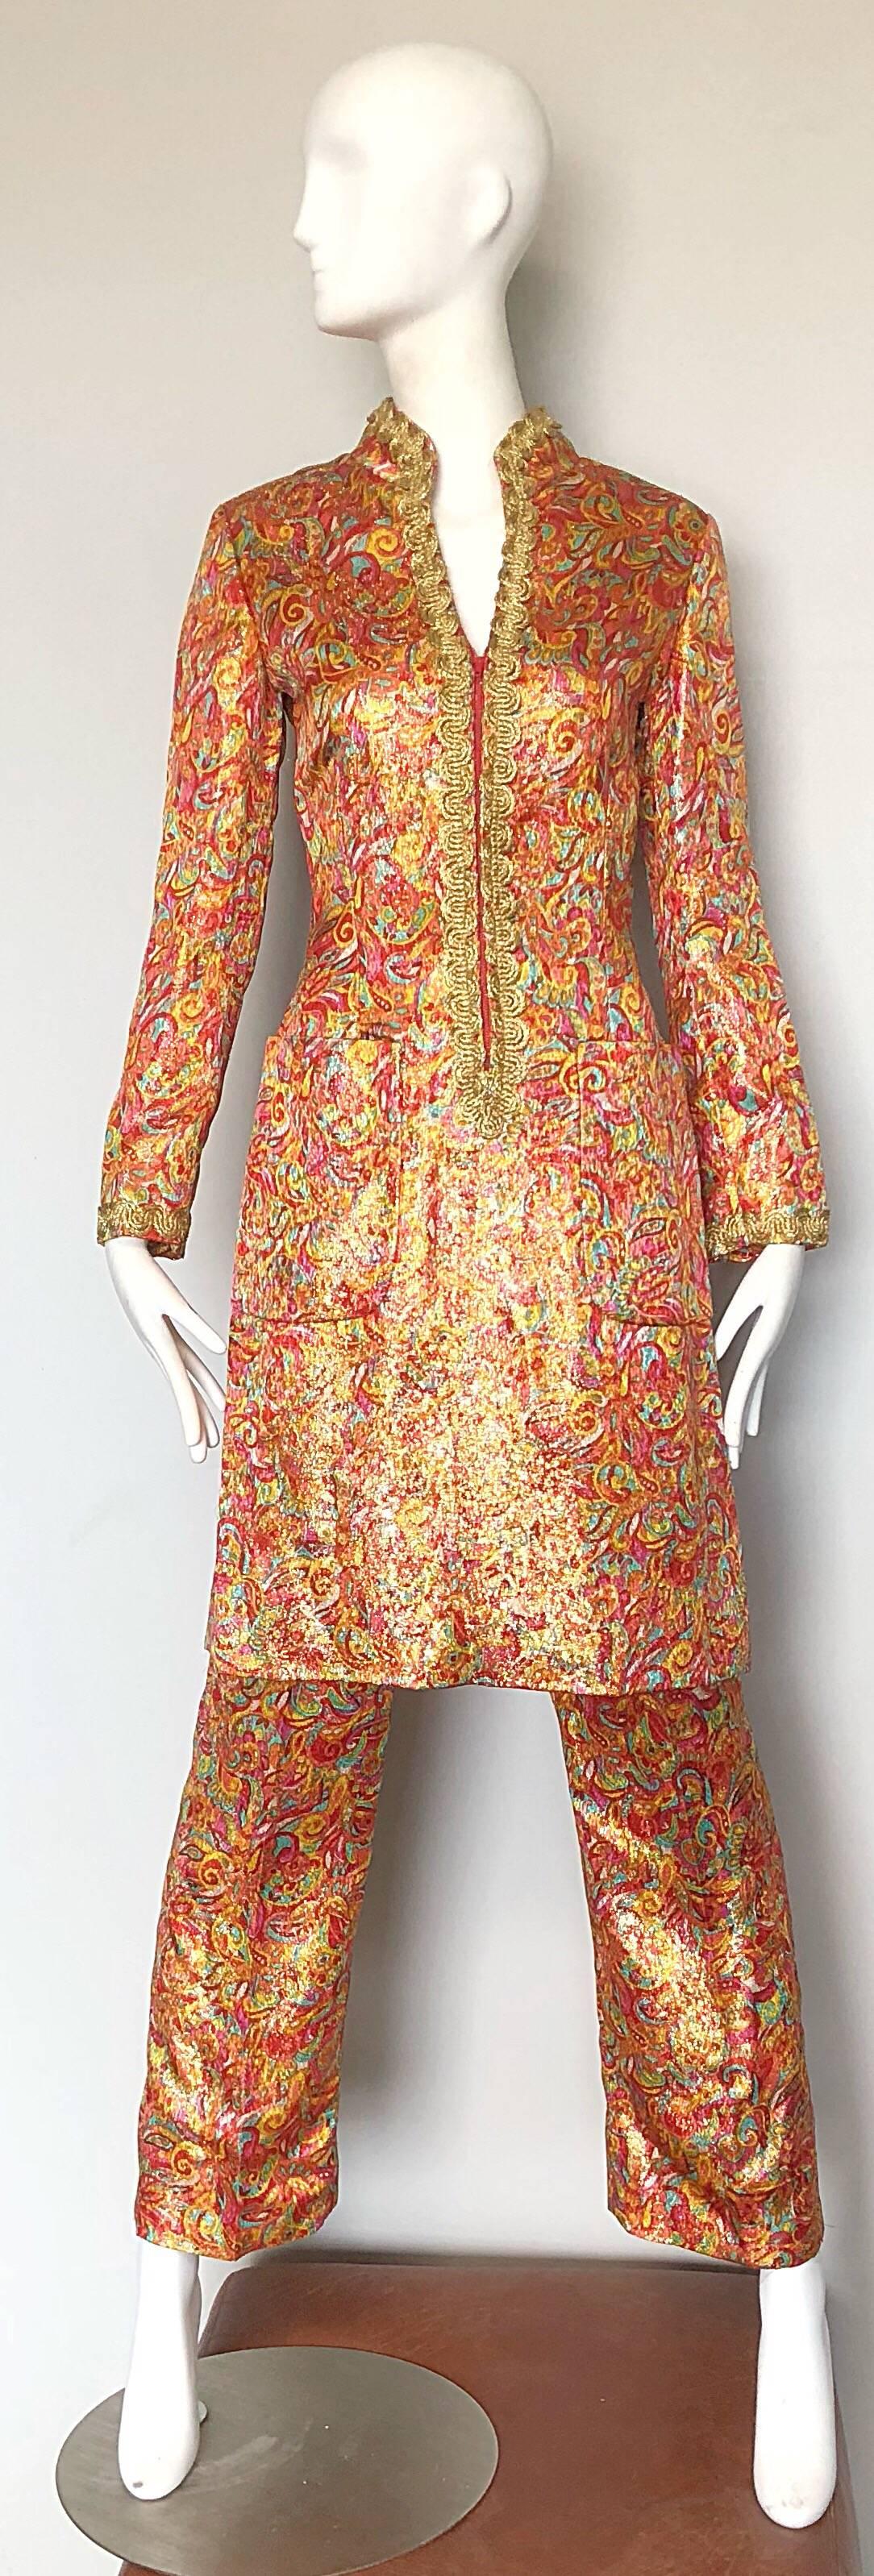 Incredible early 70s vintage NEUSTETERS mosaic print metallic tunic dress and flared leg trousers! Tunic dress zips up the front, and features gold embroidery around the collar, sleeve cuffs and down front center. Pockets at each side of the hip.